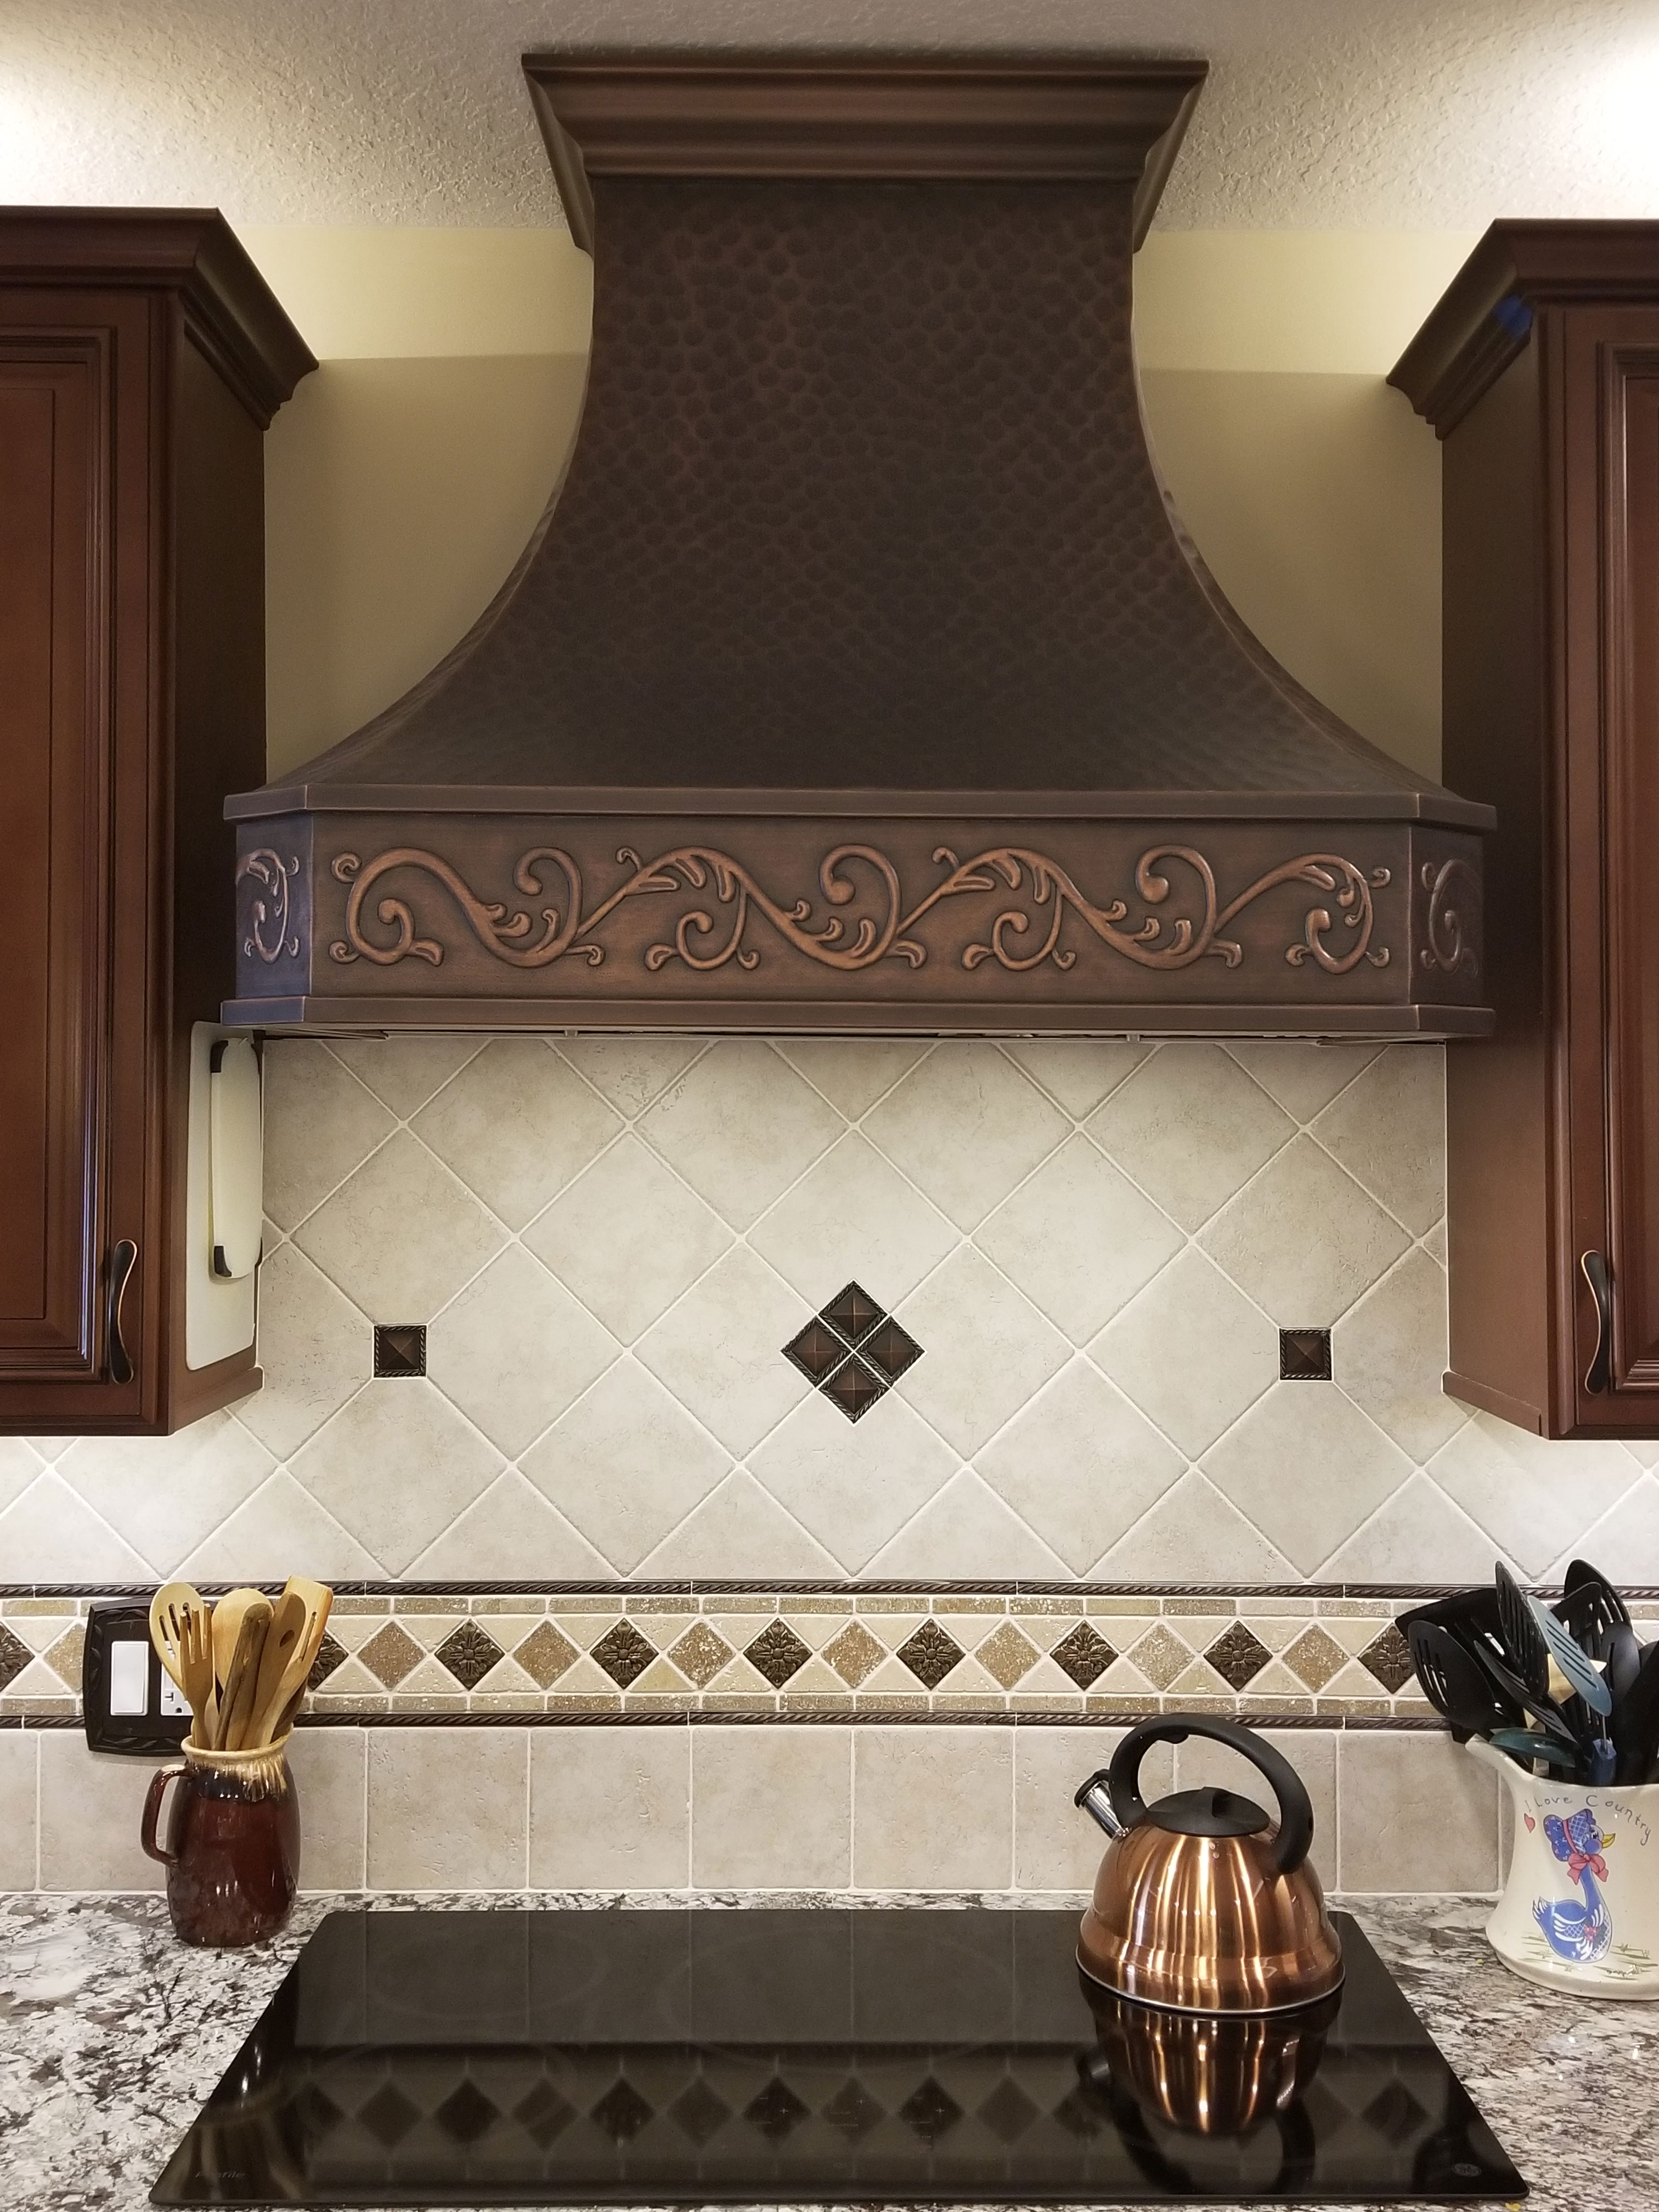 Embellished range hood over an electric stove with tea kettle